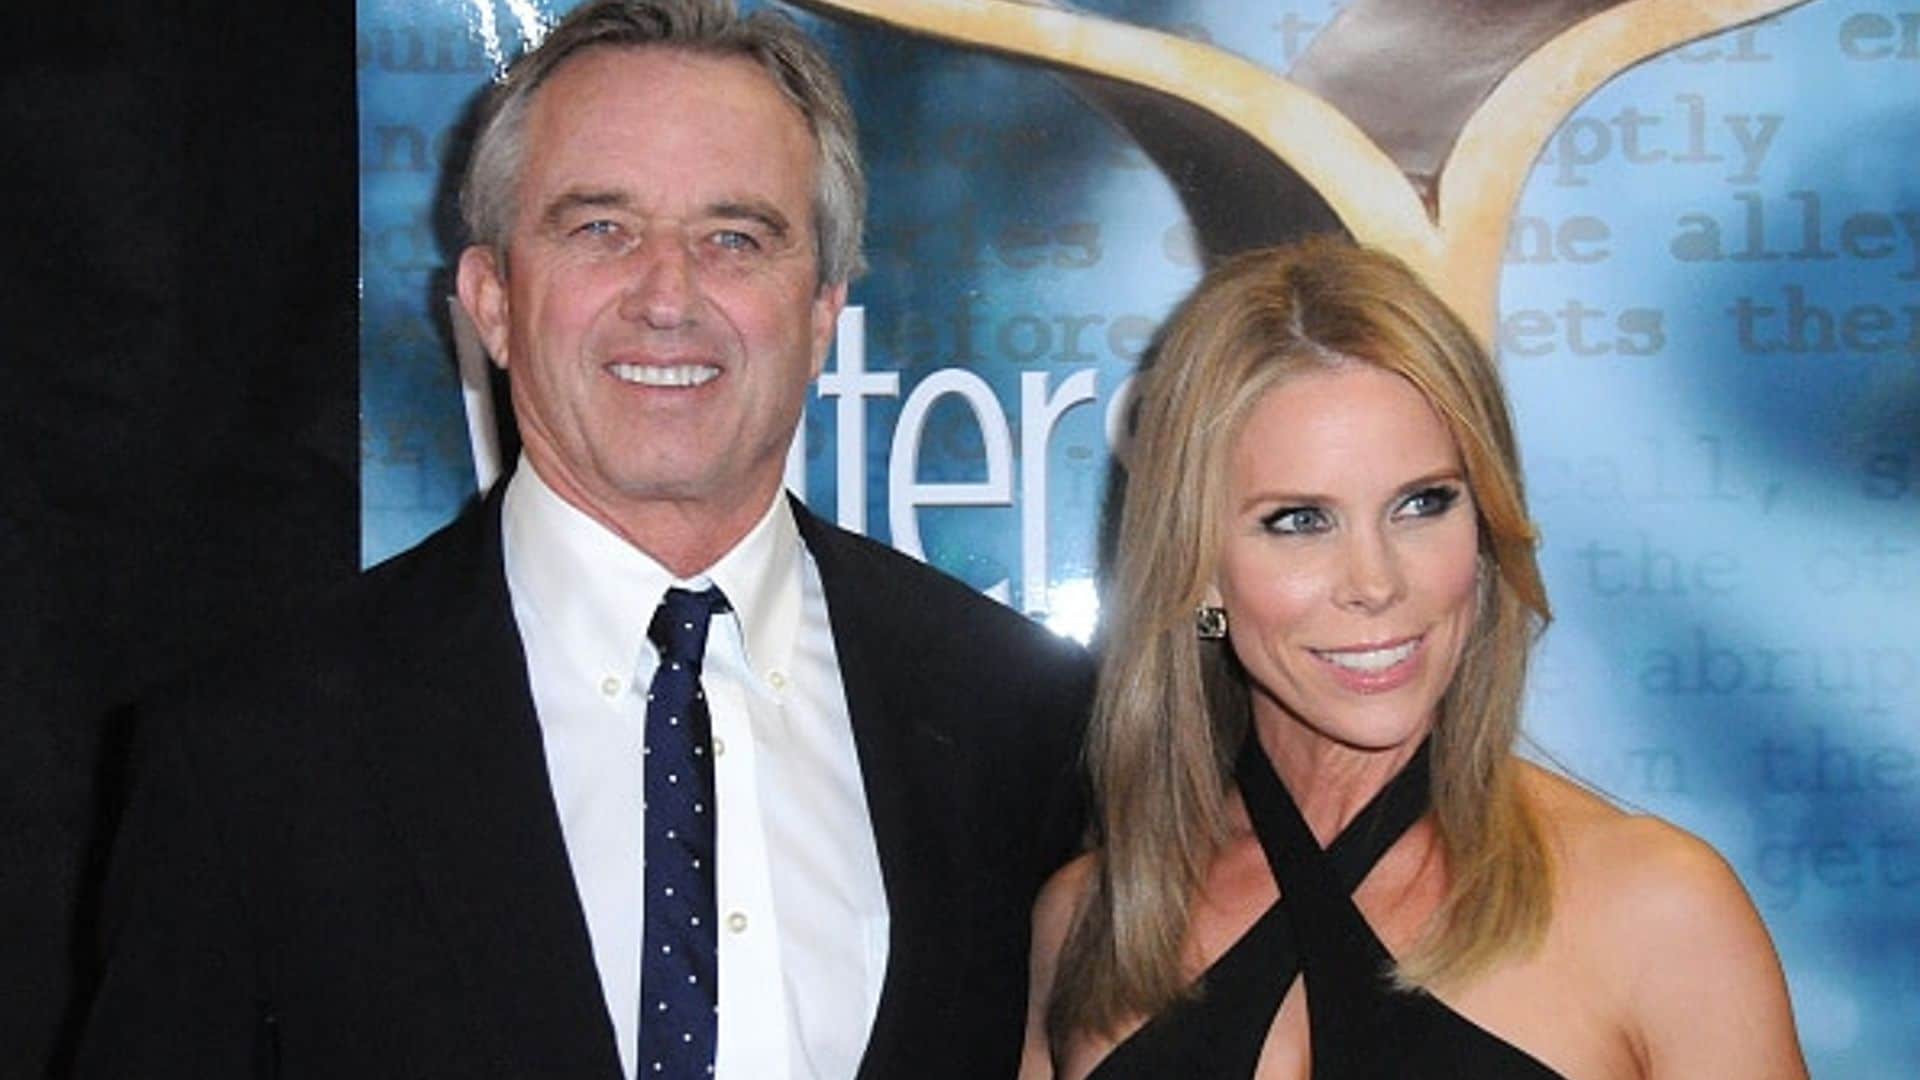 Cheryl Hines on being married to a Kennedy: 'It's crazy'